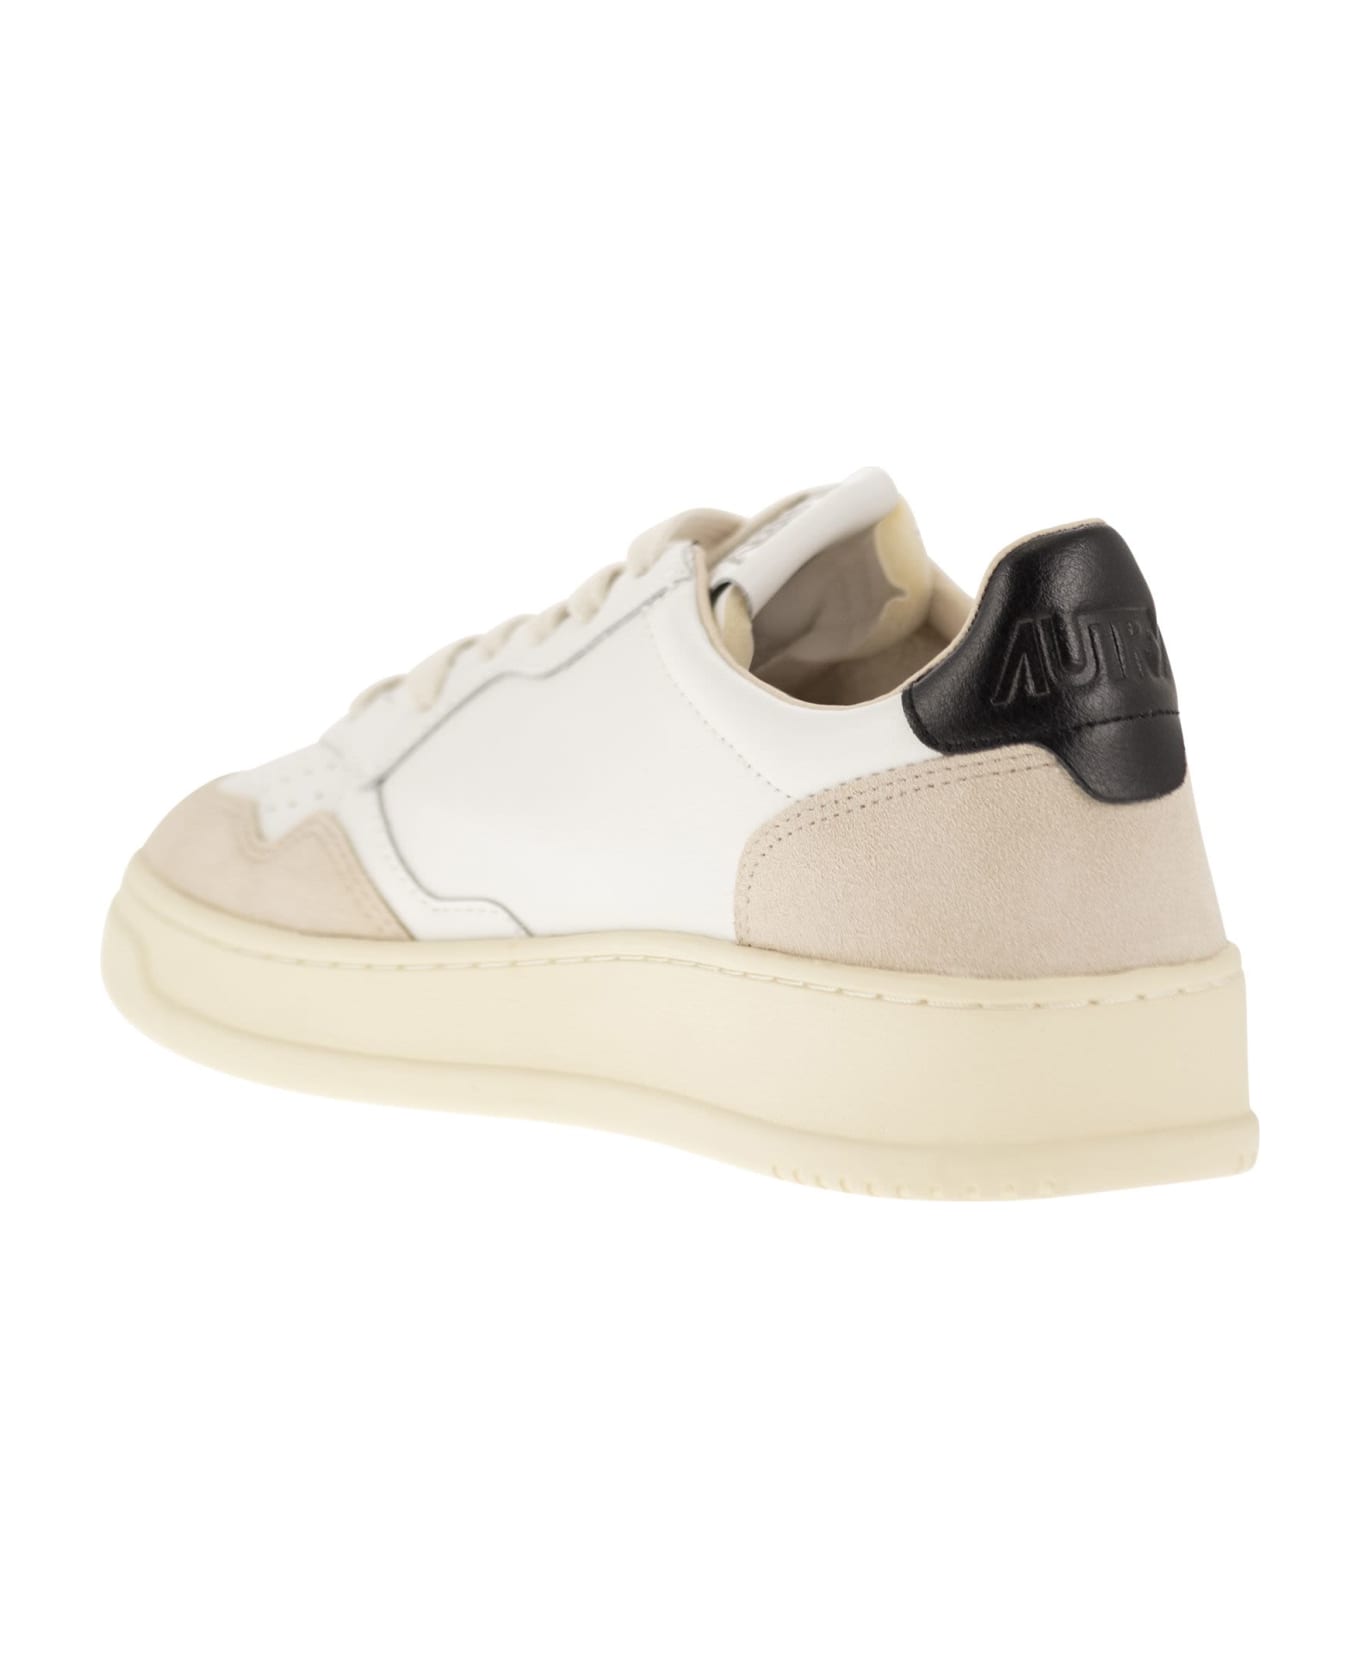 Autry Sneakers In Black And White Leather And Suede - White/black